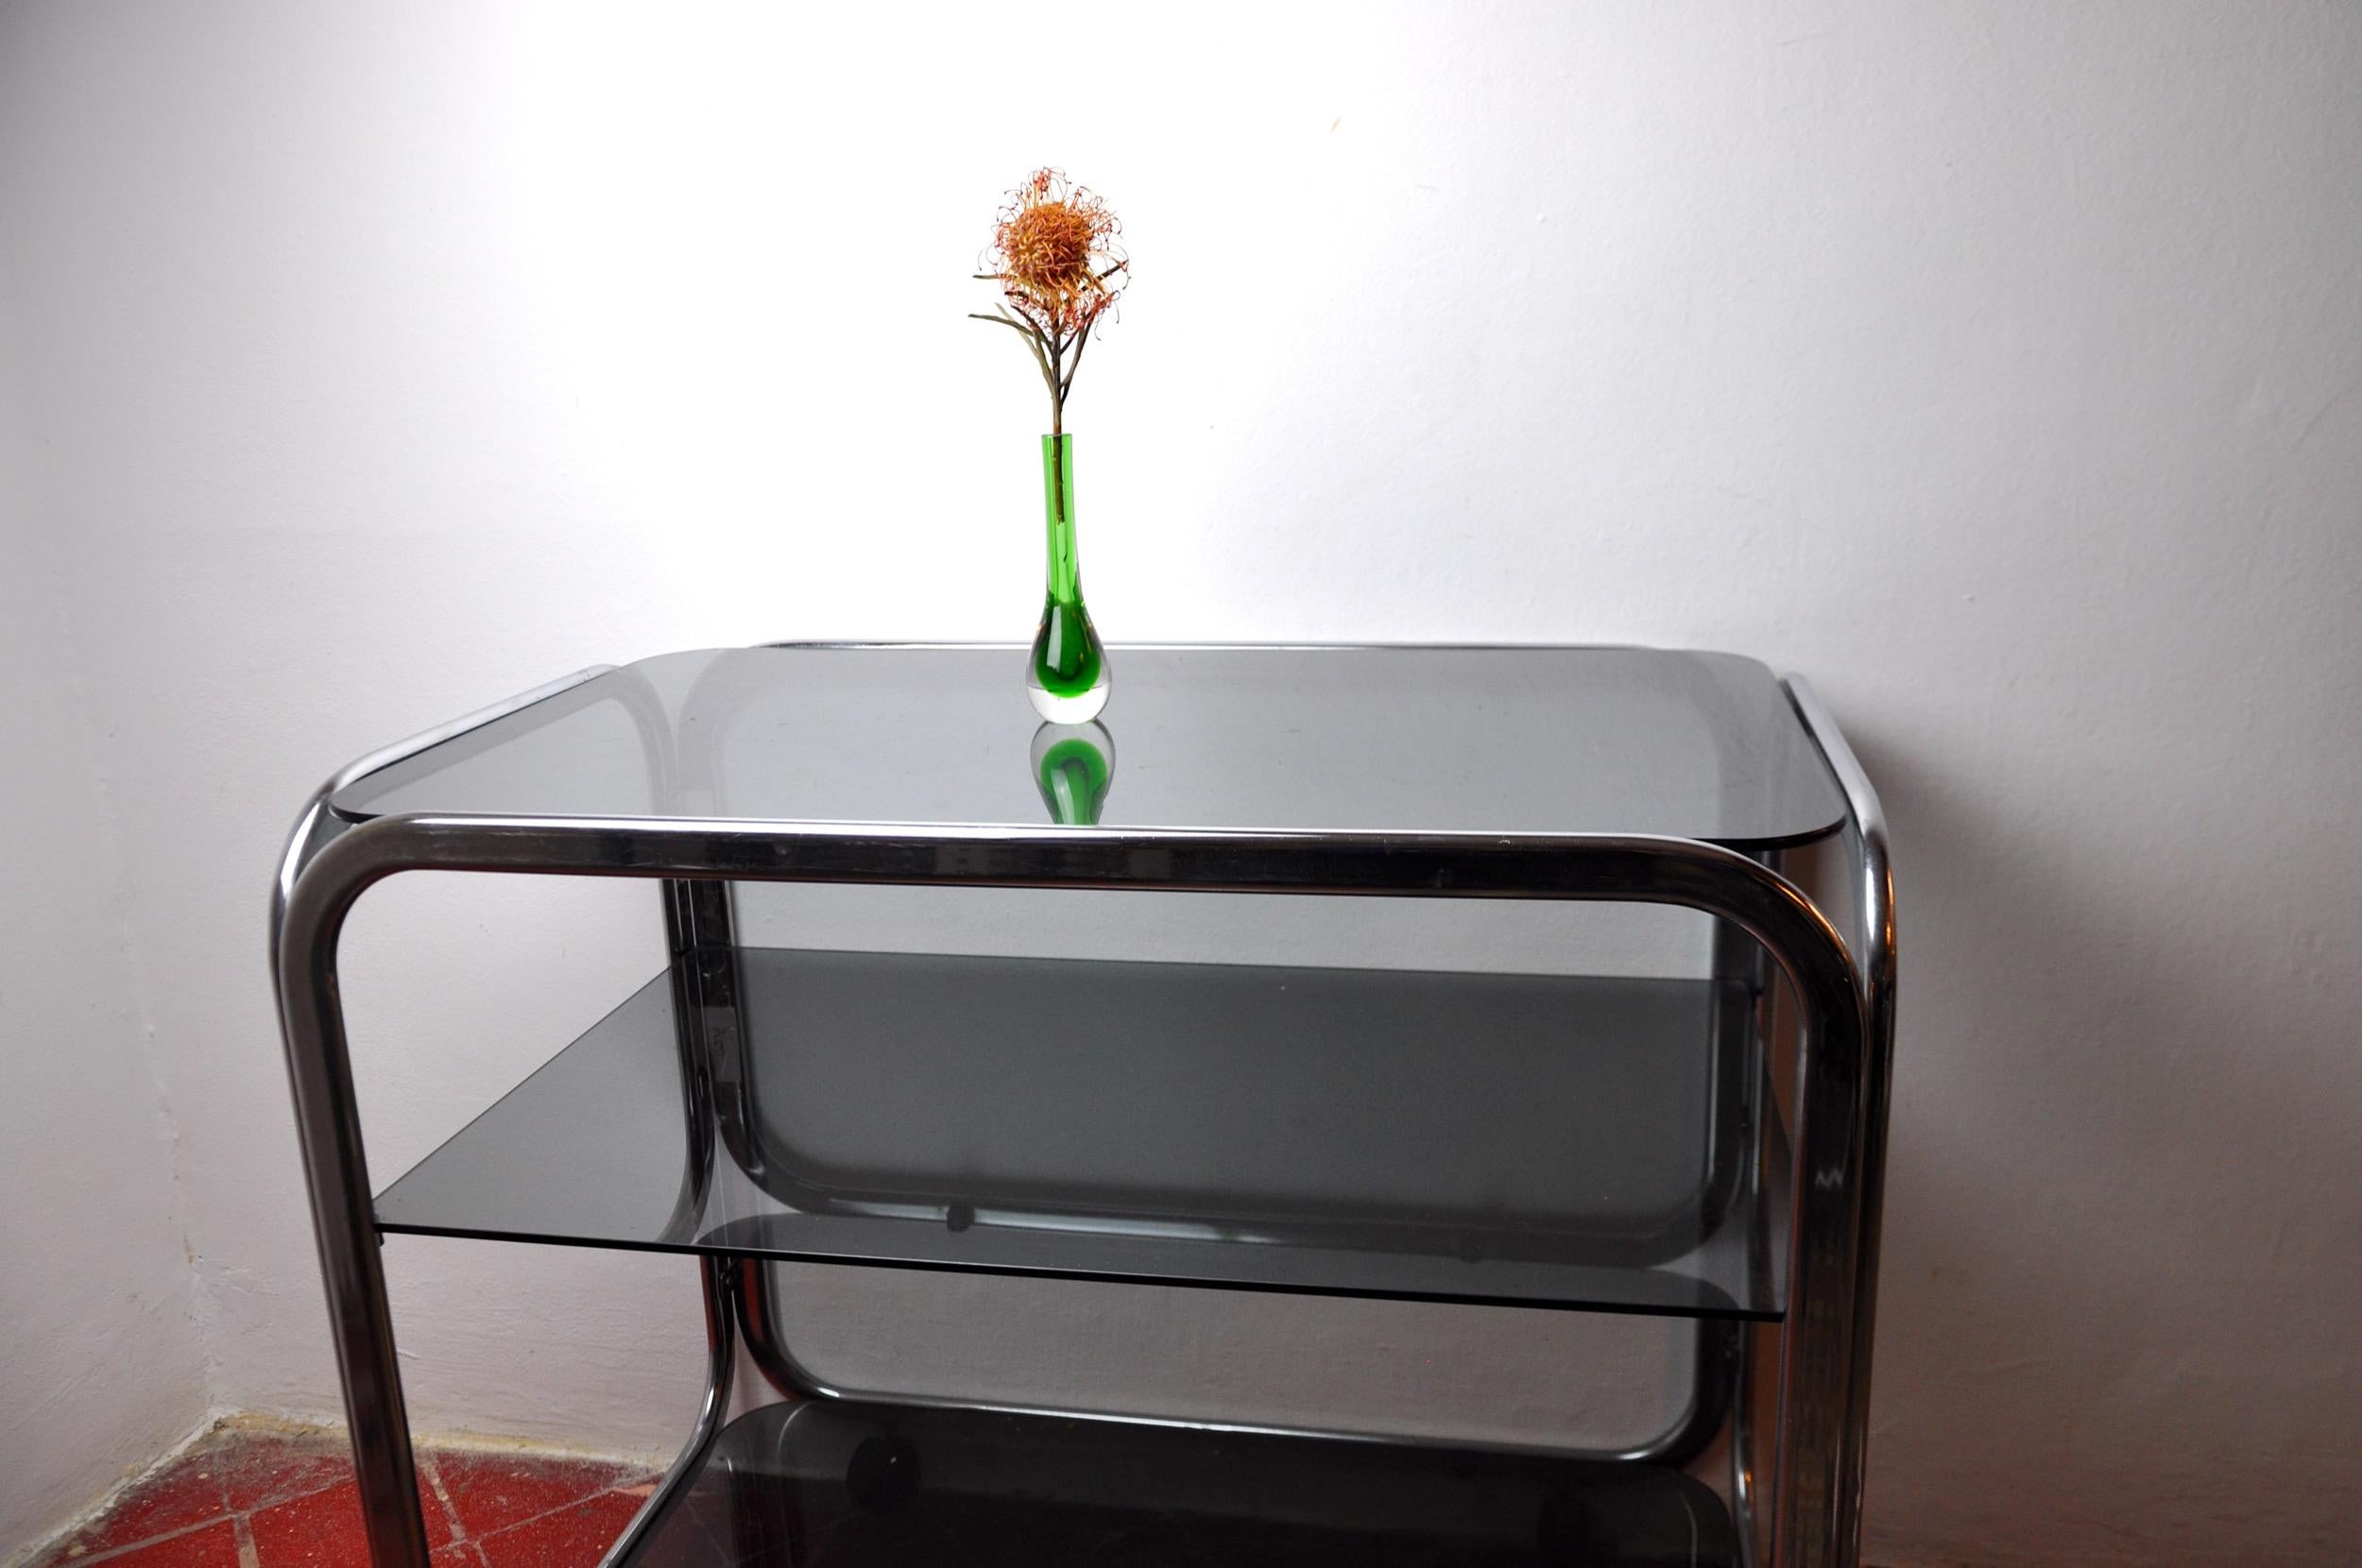 Hollywood Regency Green Soliflor Sommerso Vase by Seguso, Murano, Italy, circa 1970 For Sale